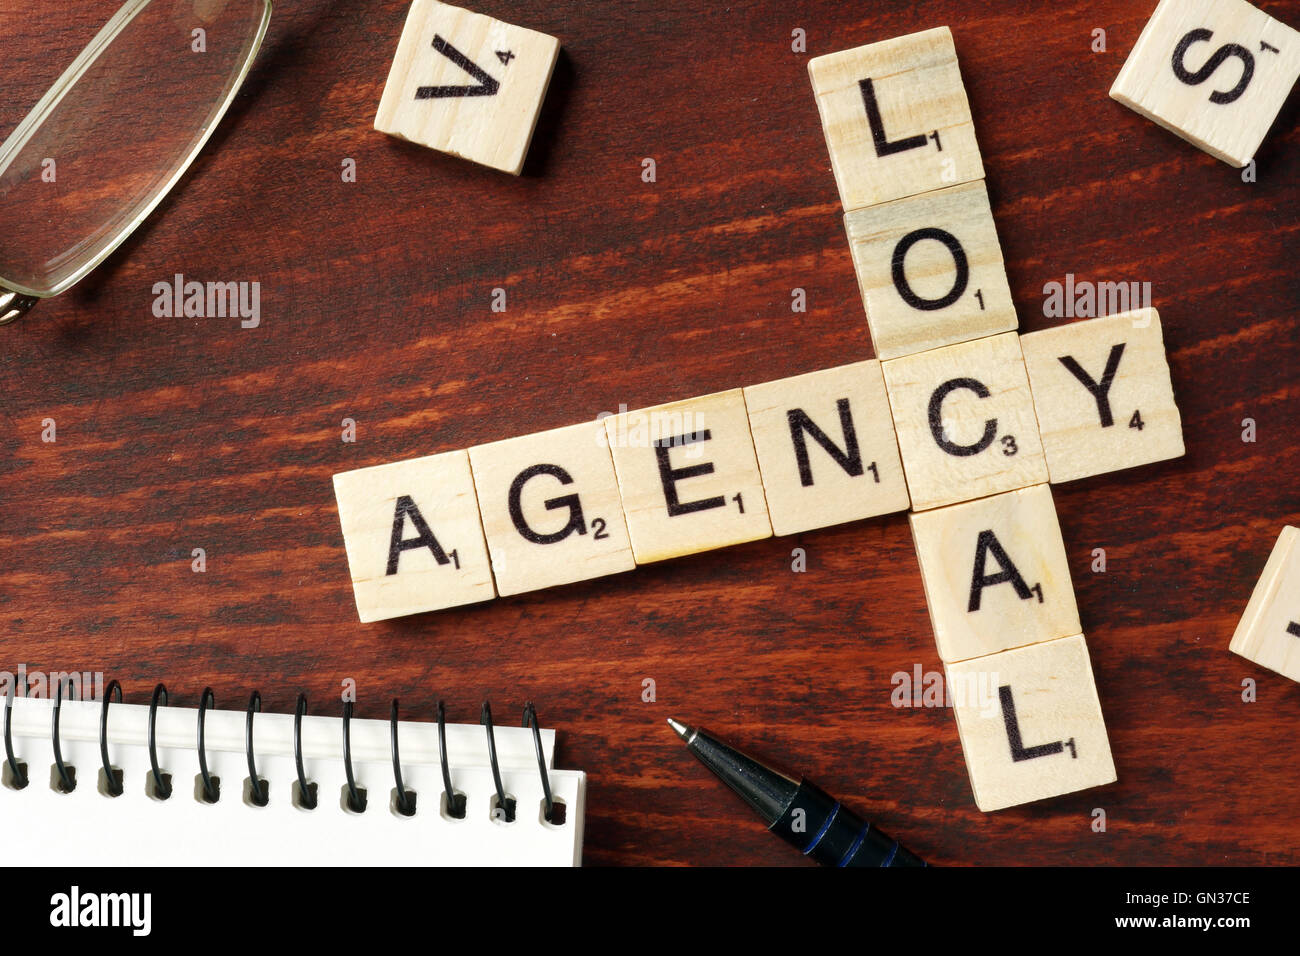 Words Local Agency from wooden blocks with letters. Stock Photo